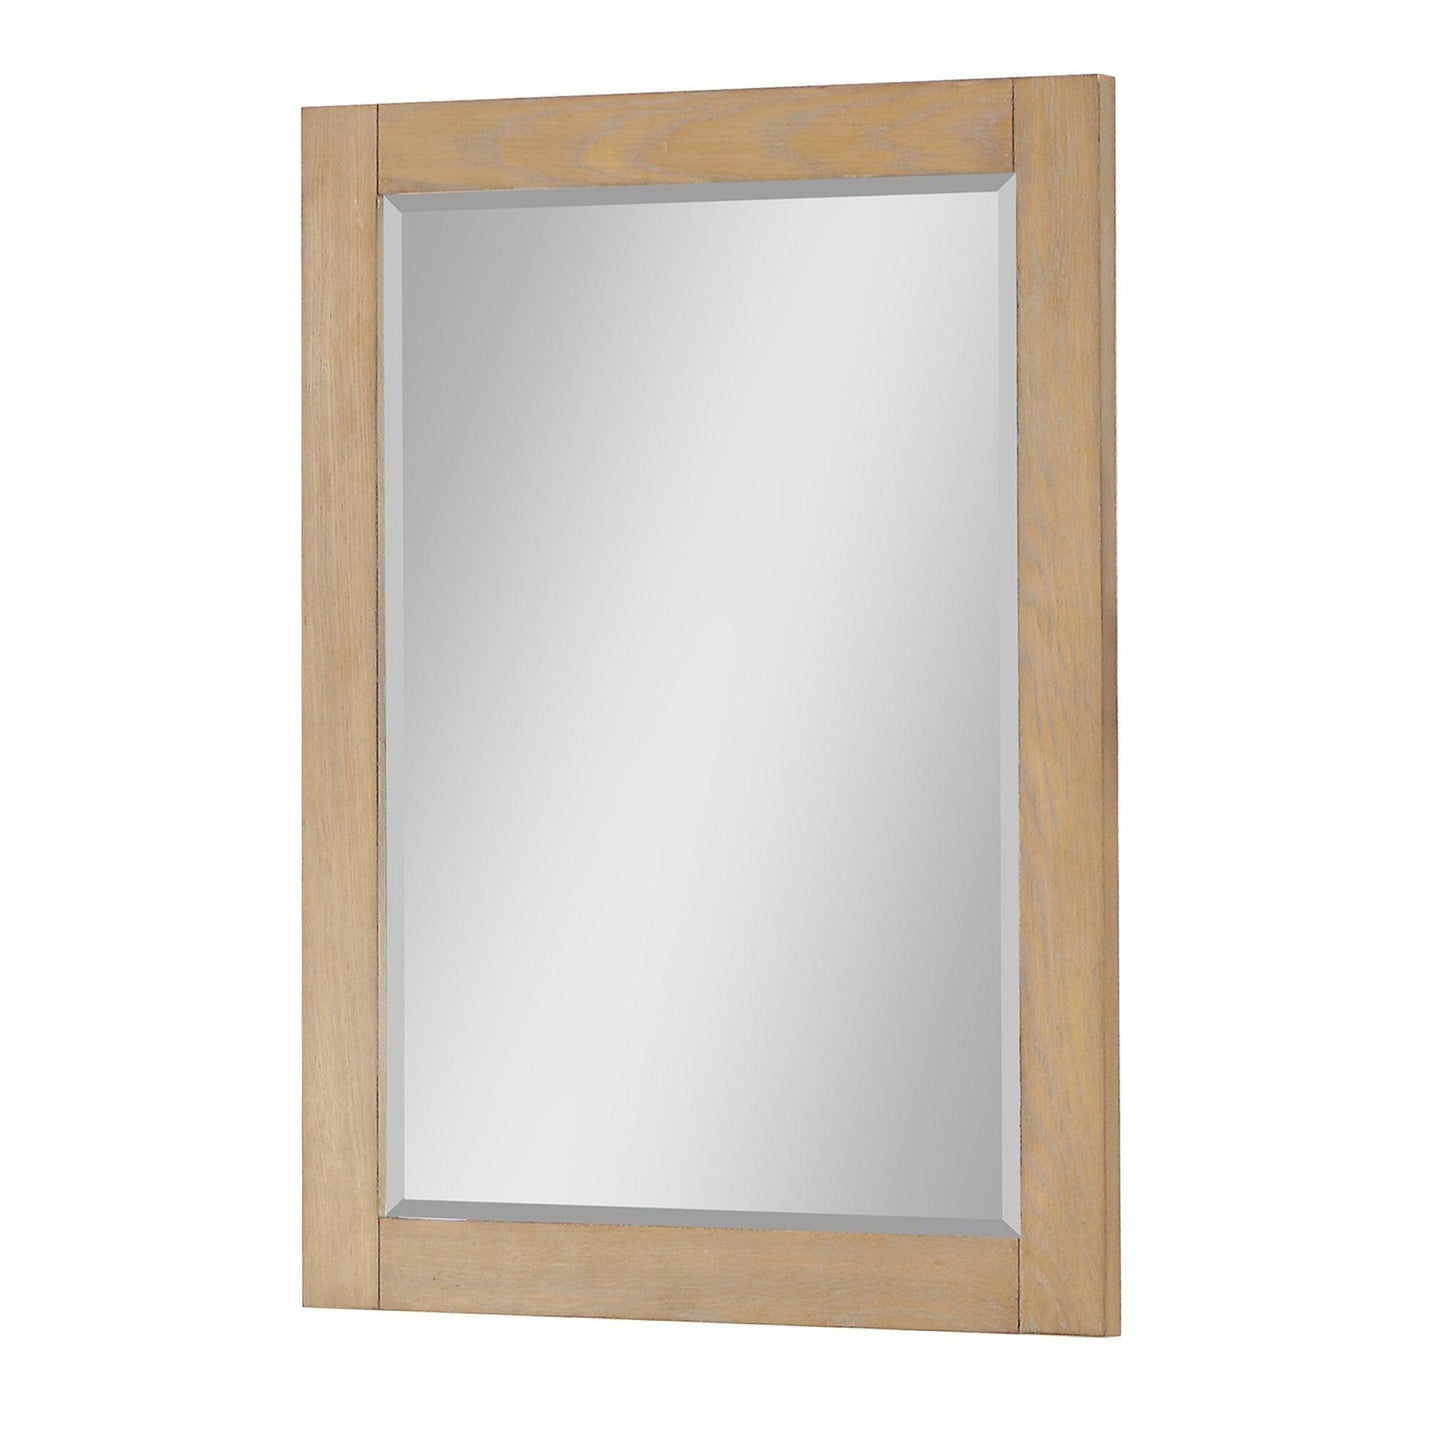 Altair Ivy 27" x 36" Rectangle Washed Oak Wood Framed Wall-Mounted Mirror